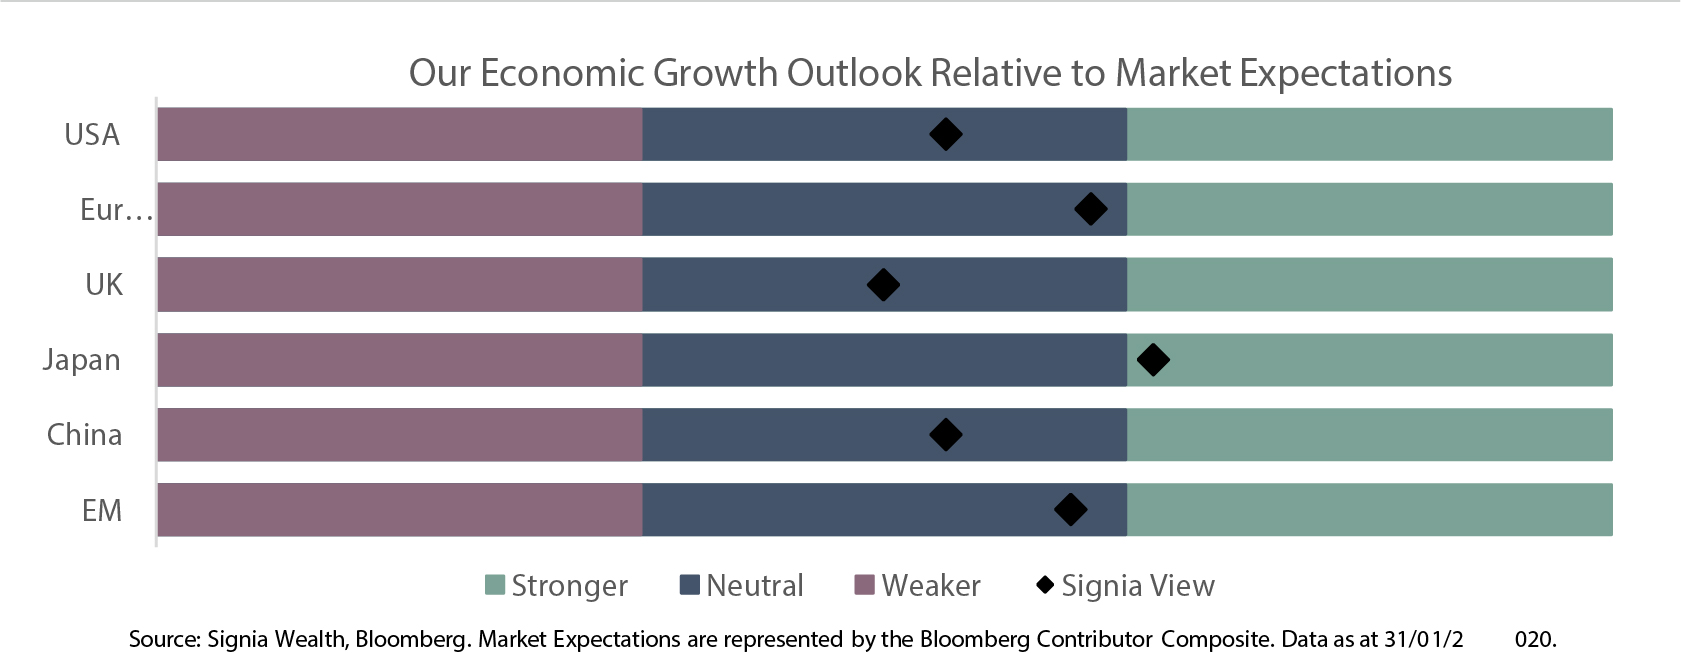 Our Economic Growth Outlook Relative to Market Expectations